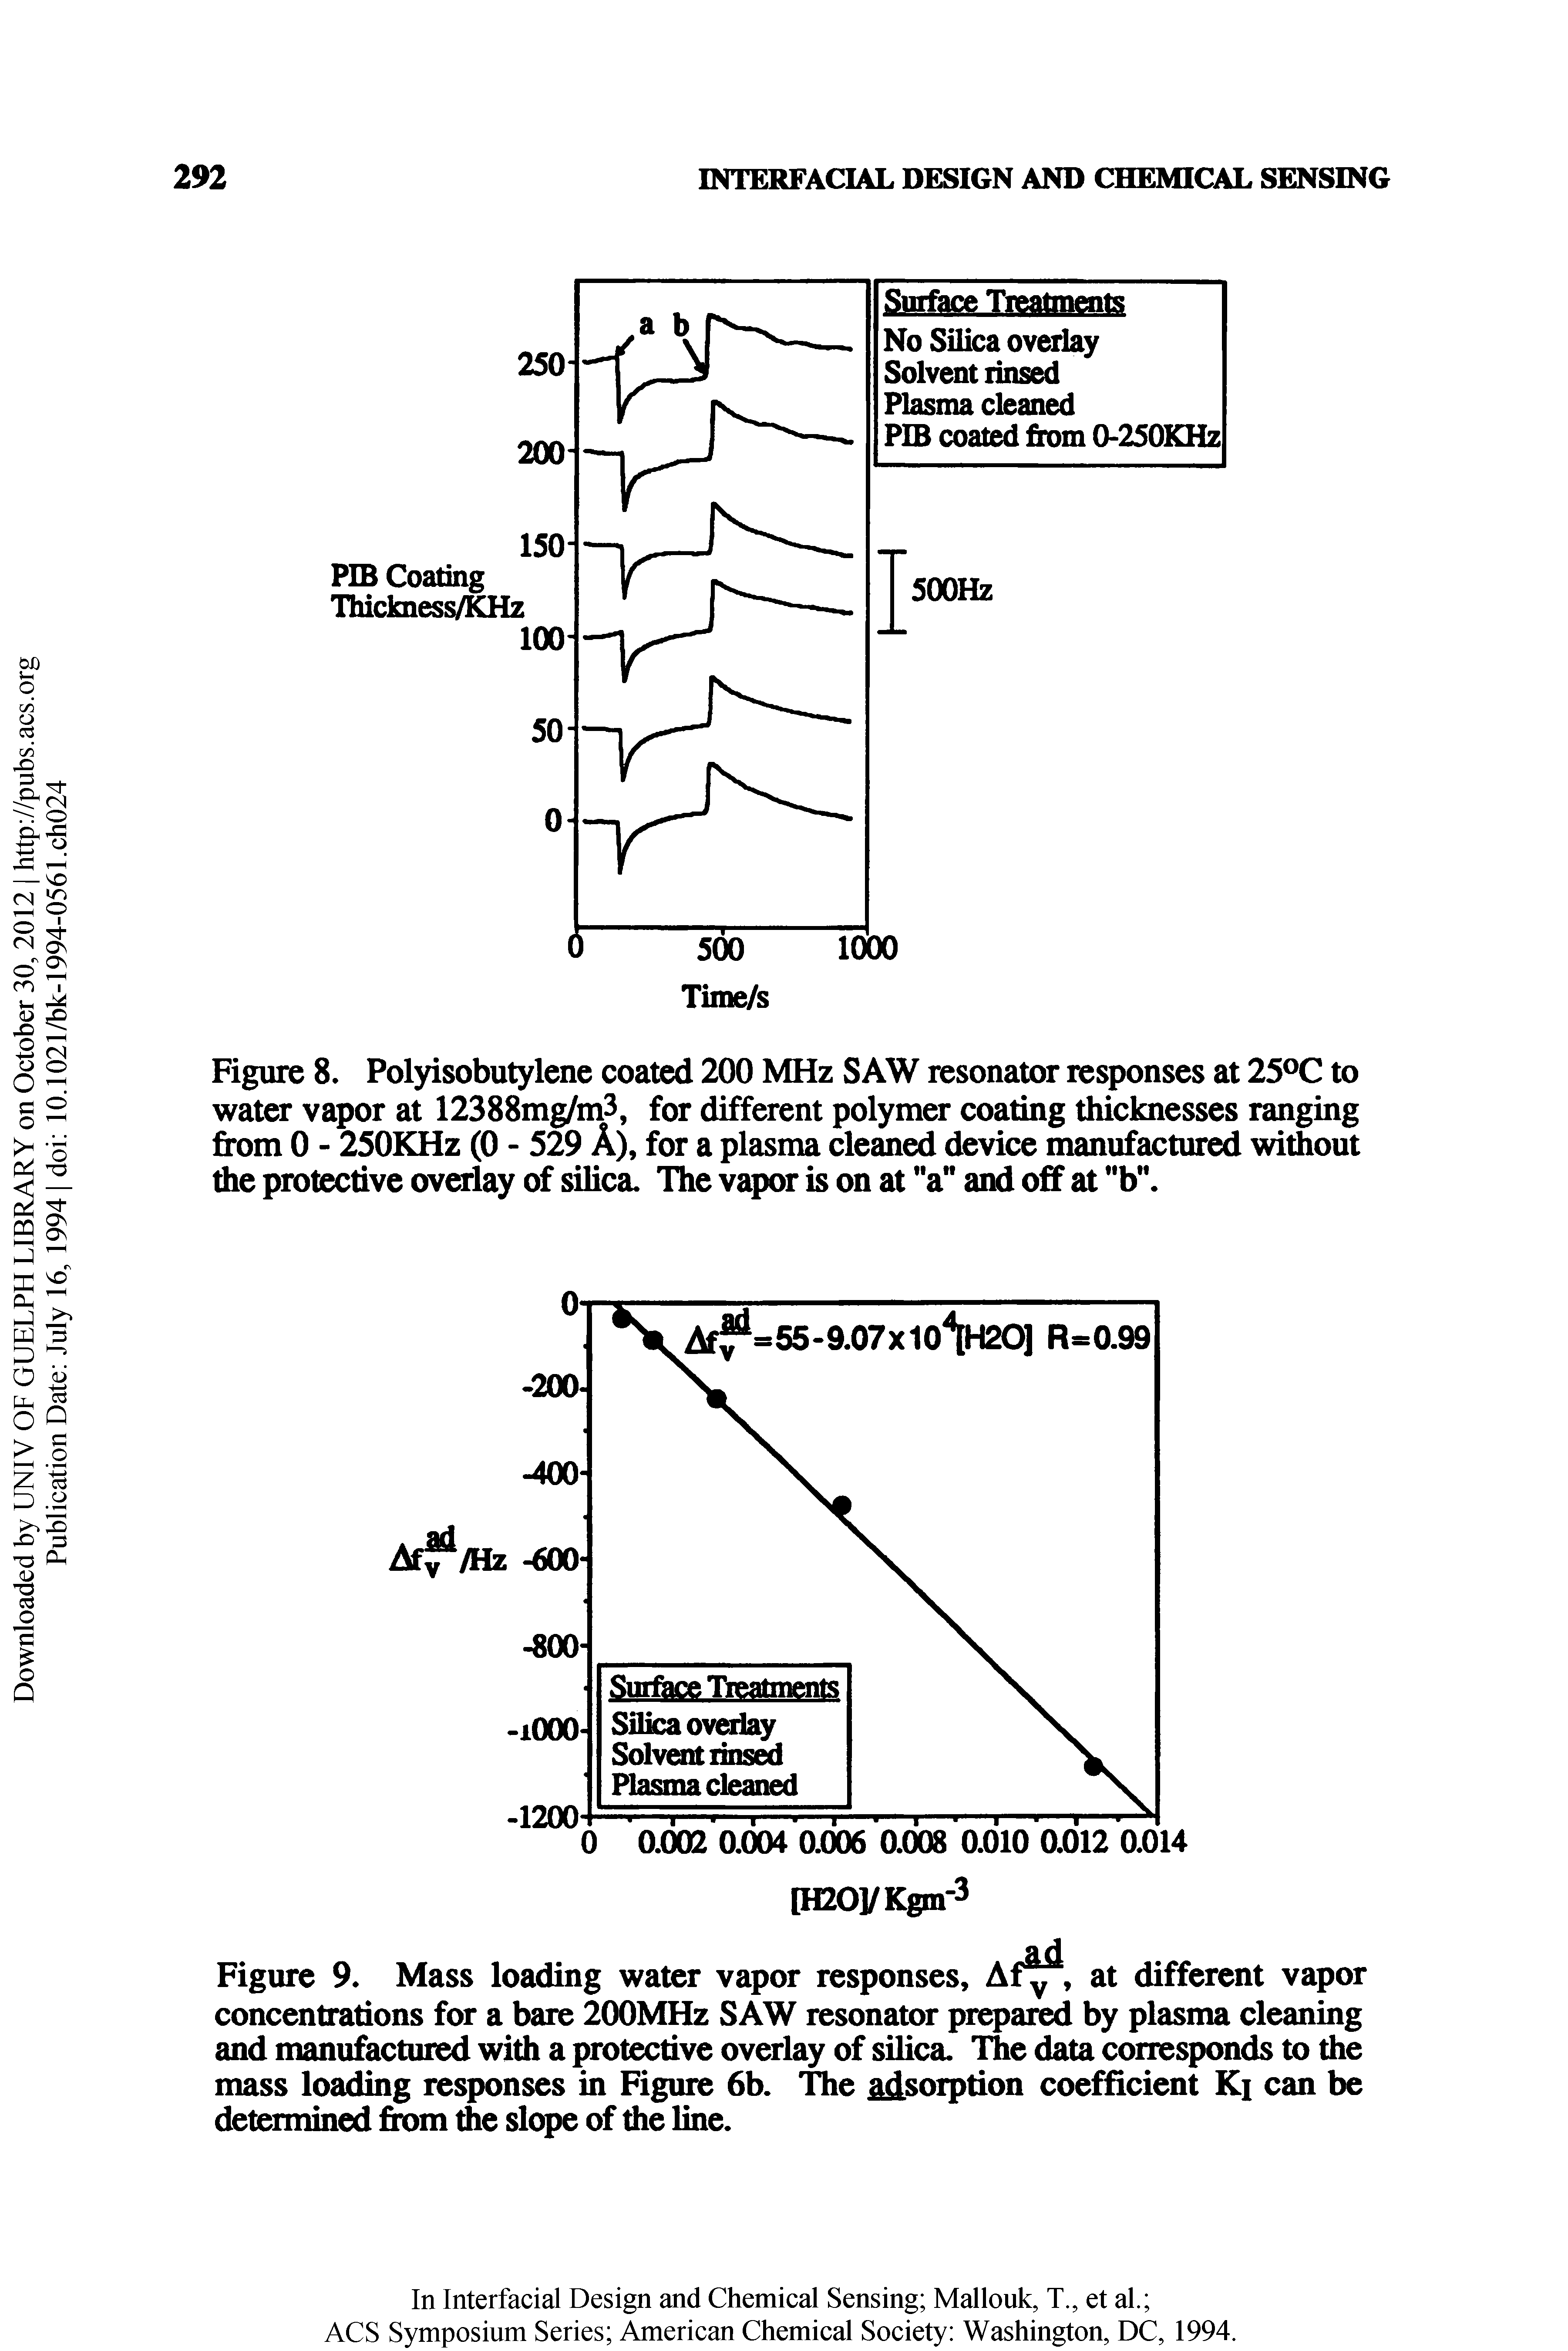 Figure 8. Polyisobutylcne coated 200 MHz SAW resonator responses at 25 C to water vapor at 12388mg/m3, for different polymer coating thicknesses ranging from 0 - 2S0KHz (0 - 529 A), for a plasma cleaned device manufactured without the protective overlay of silica. The vapor is on at "a" and off at b .